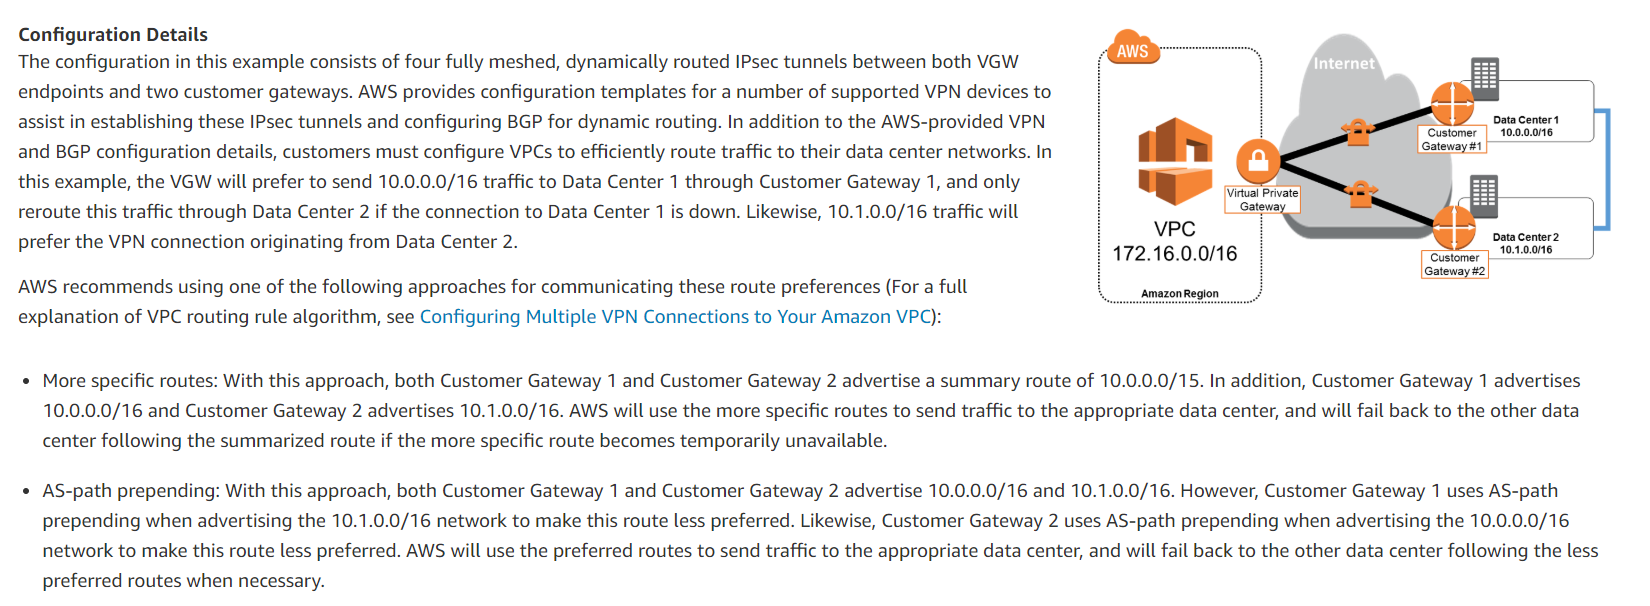 Configuration Details
The configuration in this example consists of four fully meshed, dynamically routed IPsec tunnels between both VGW

endpoints and two customer gateways. AWS provides configuration templates for a number of supported VPN devices to
assist in establishing these IPsec tunnels and configuring BGP for dynamic routing. In addition to the AWS-provided VPN
and BGP configuration details, customers must configure VPCs to efficiently route traffic to their data center networks. In
this example, the VGW will prefer to send 10.0.0.0/16 traffic to Data Center 1 through Customer Gateway 1, and only
reroute this traffic through Data Center 2 if the connection to Data Center 1 is down. Likewise, 10.1.0.0/16 traffic will

Datacenter
10.00.06

Data Center2
10.1.0.016

prefer the VPN connection originating from Data Center 2. 172.16.0.0/16

AWS recommends using one of the following approaches for communicating these route preferences (For a full
explanation of VPC routing rule algorithm, see Configuring Multiple VPN Connections to Your Amazon VPC):

* More specific routes: With this approach, both Customer Gateway 1 and Customer Gateway 2 advertise a summary route of 10.0.0.0/15. In addition, Customer Gateway 1 advertises
10.0.0.0/16 and Customer Gateway 2 advertises 10.1.0.0/16. AWS will use the more specific routes to send traffic to the appropriate data center, and will fail back to the other data
center following the summarized route if the more specific route becomes temporarily unavailable.

* AS-path prepending: With this approach, both Customer Gateway 1 and Customer Gateway 2 advertise 10.0.0.0/16 and 10.1.0.0/16. However, Customer Gateway 1 uses AS-path
prepending when advertising the 10.1.0.0/16 network to make this route less preferred. Likewise, Customer Gateway 2 uses AS-path prepending when advertising the 10.0.0.0/16
network to make this route less preferred. AWS will use the preferred routes to send traffic to the appropriate data center, and will fail back to the other data center following the less
preferred routes when necessary.